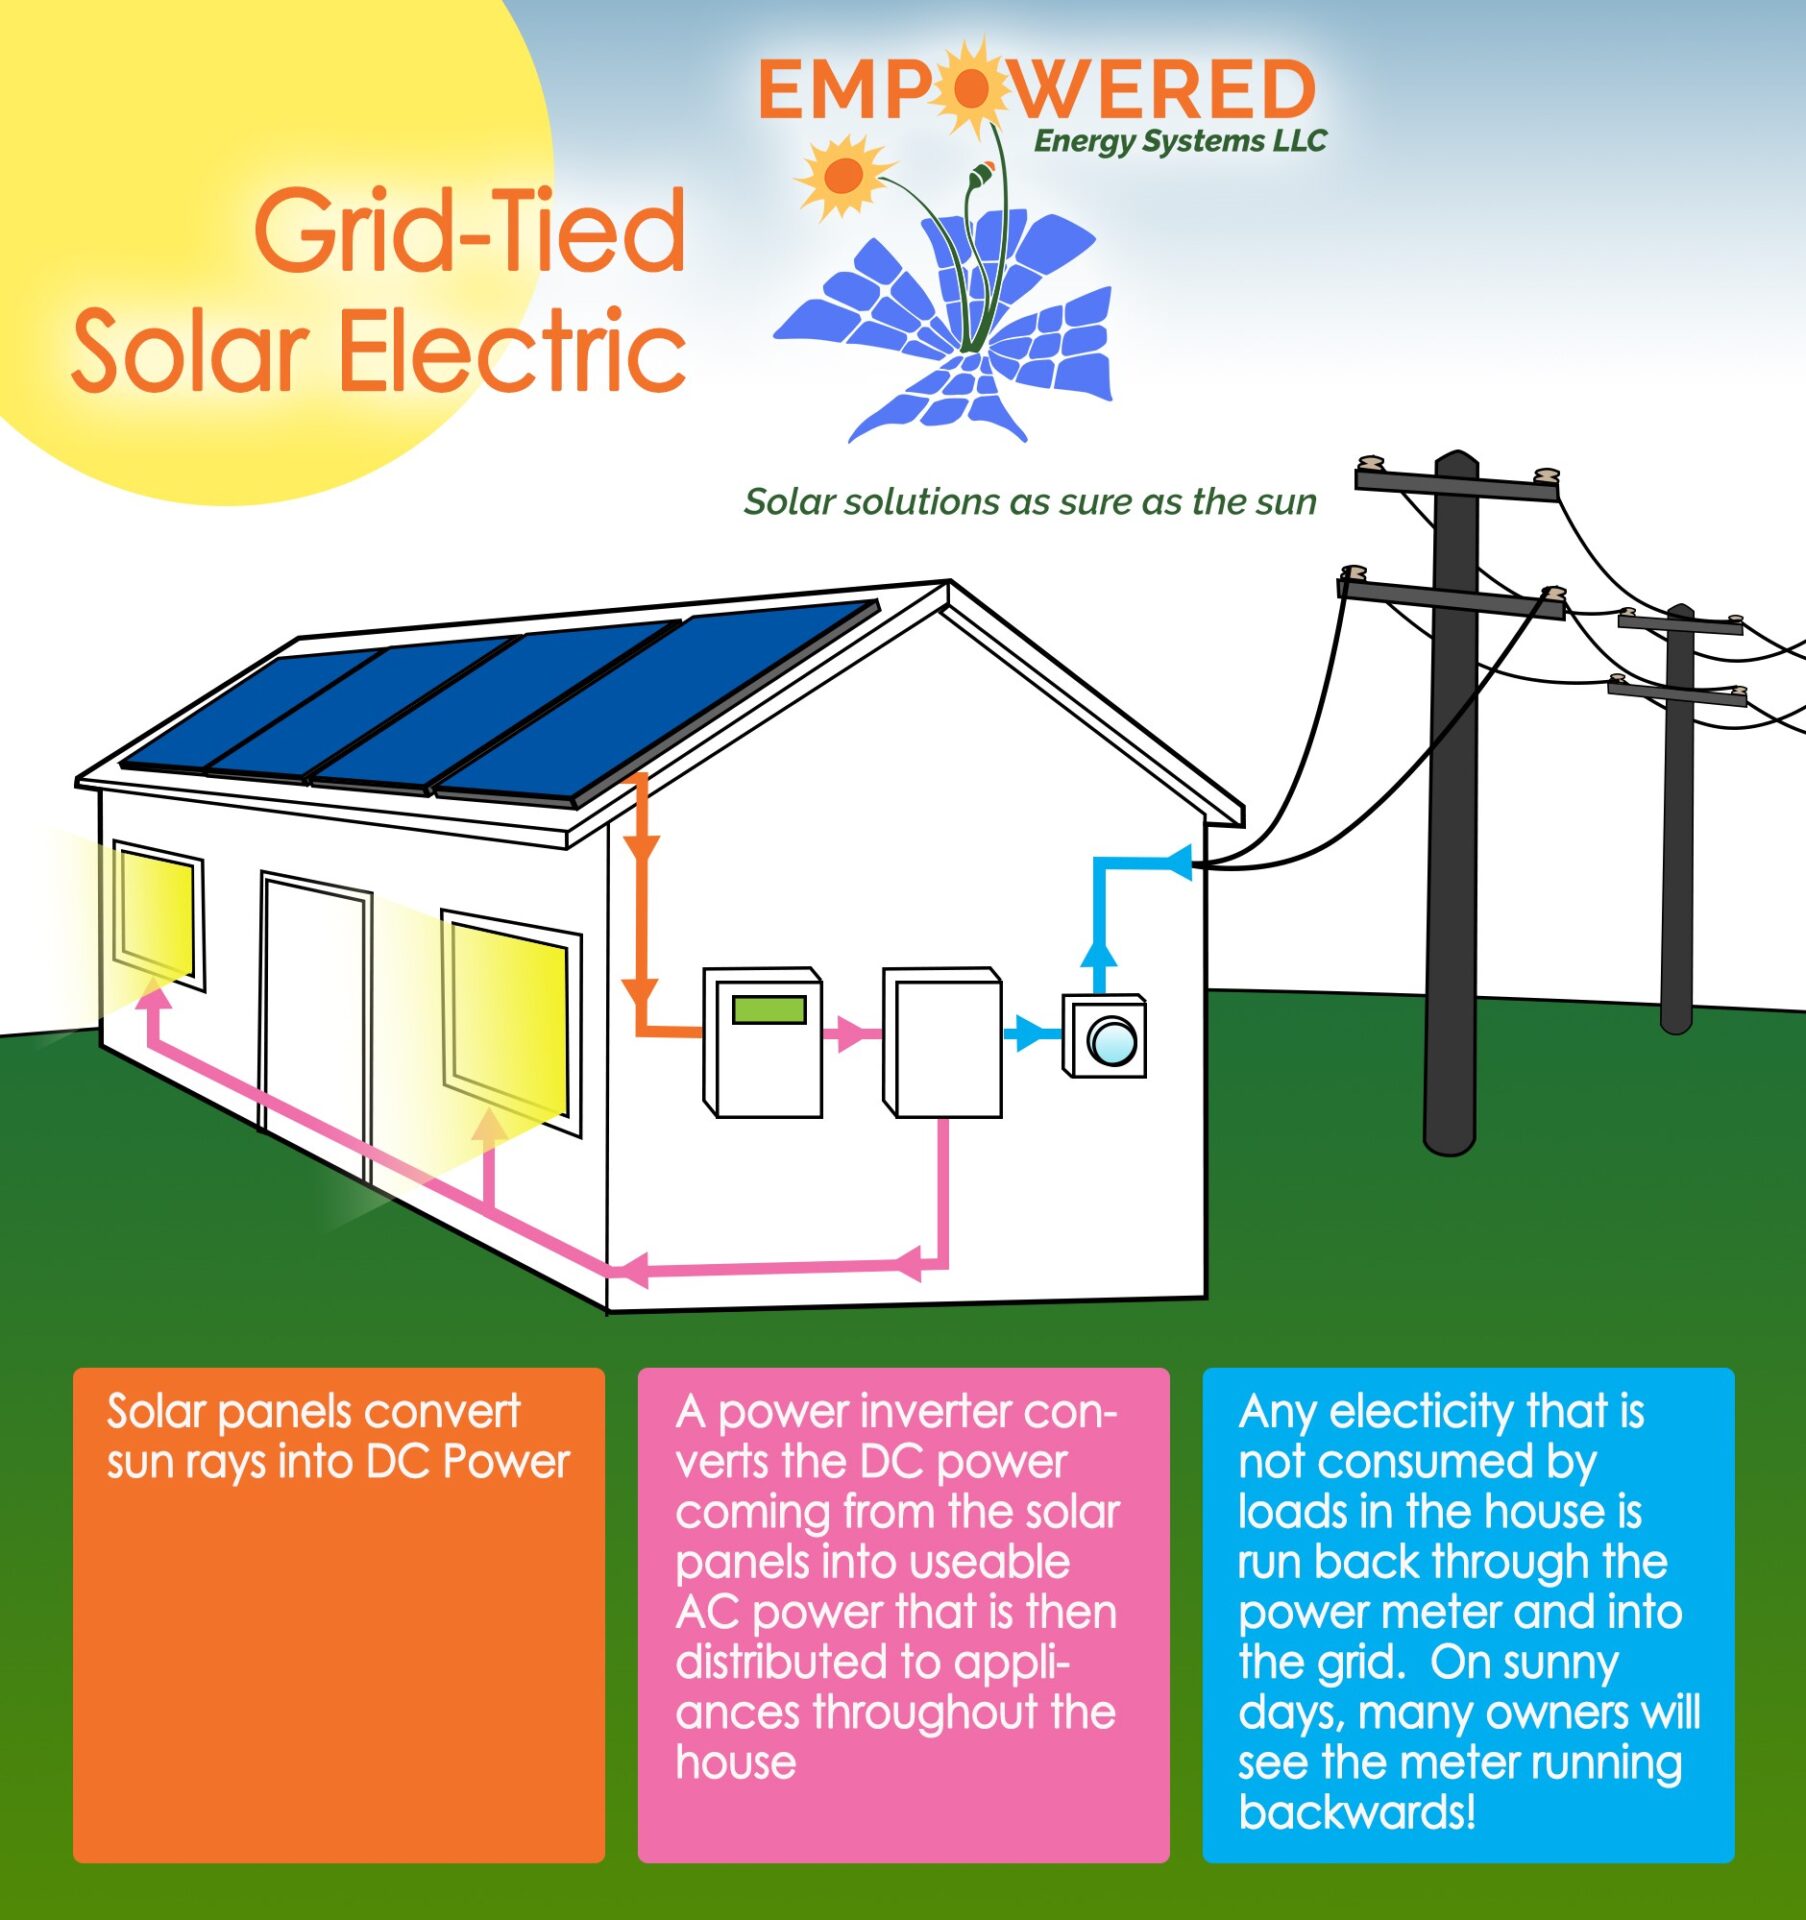 Residential Solar Empowered Energy Systems